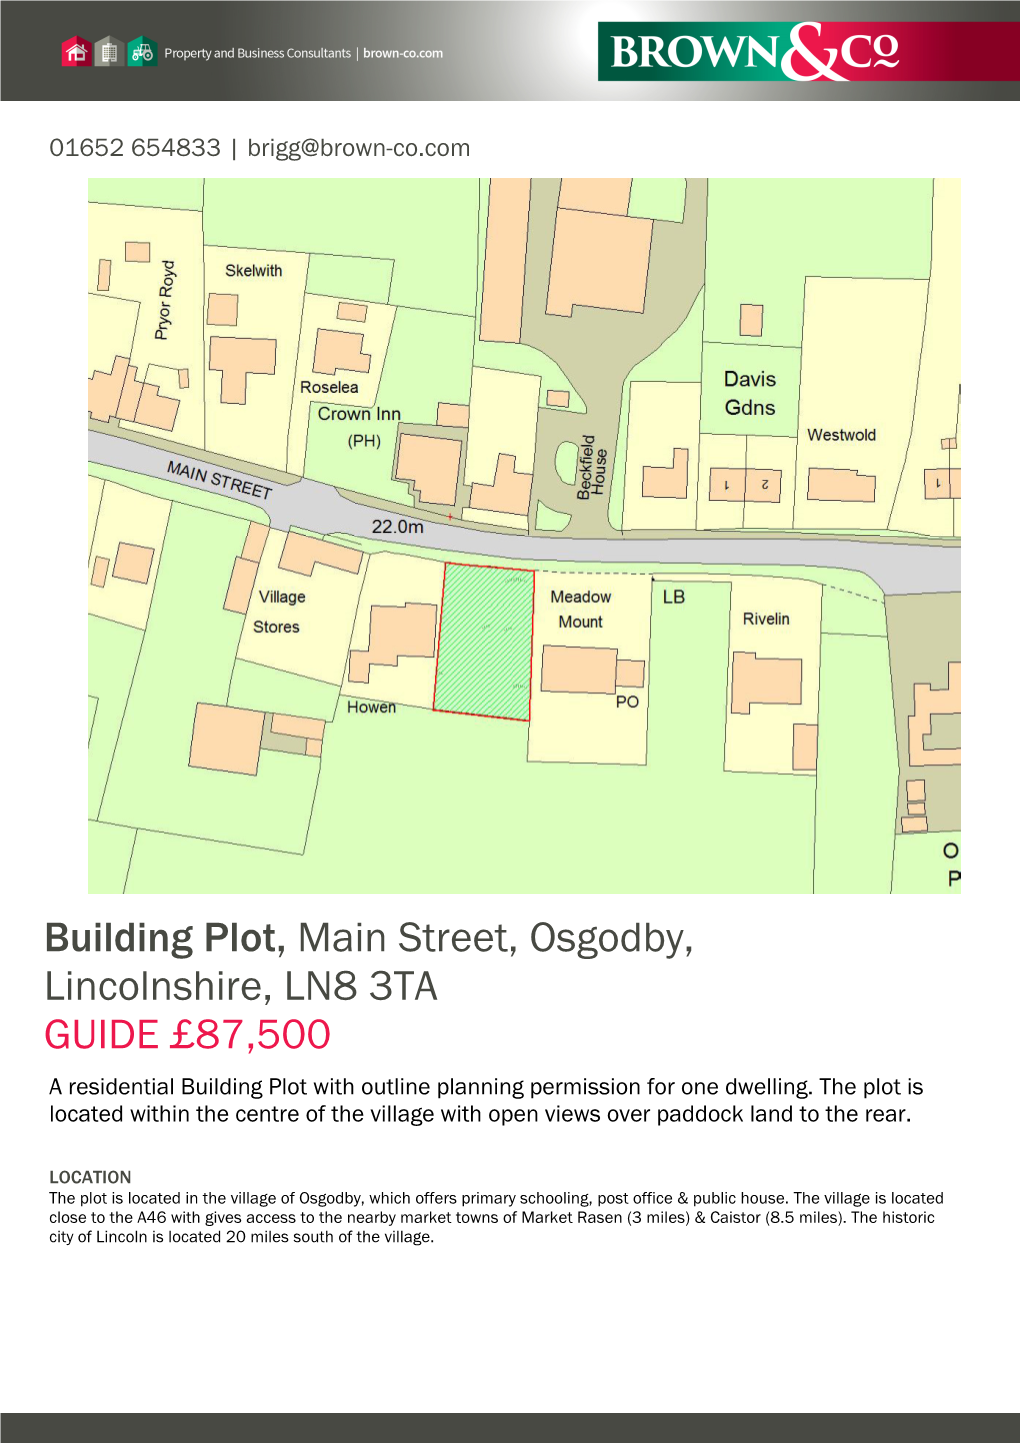 Building Plot, Main Street, Osgodby, Lincolnshire, LN8 3TA GUIDE £ 87,500 a Residential Building Plot with Outline Planning Permission for One Dwelling